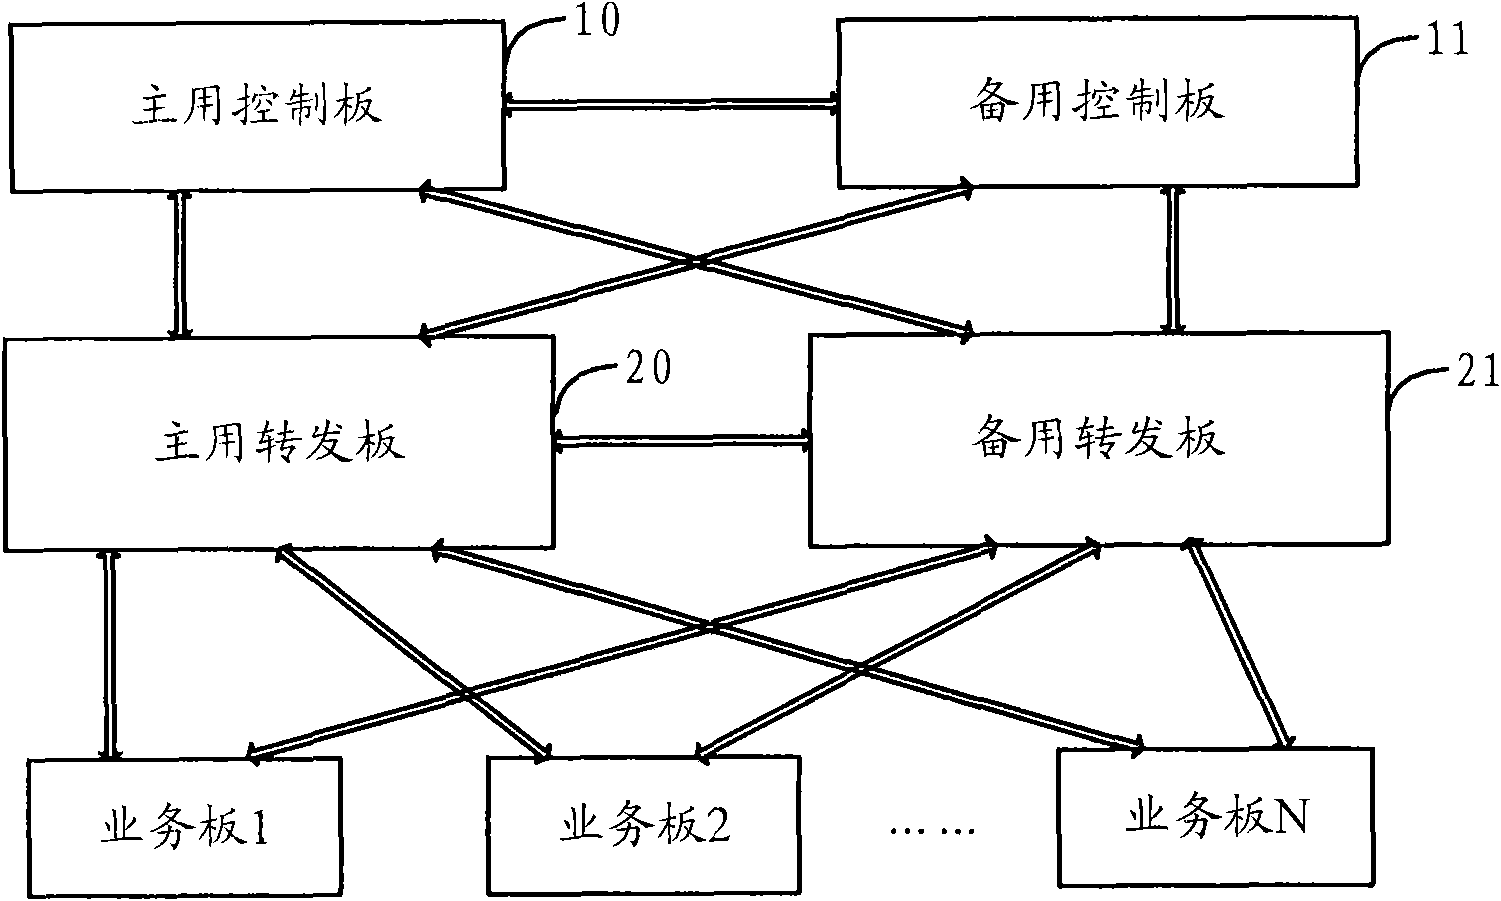 Route retransmission realization device and method, and switching equipment